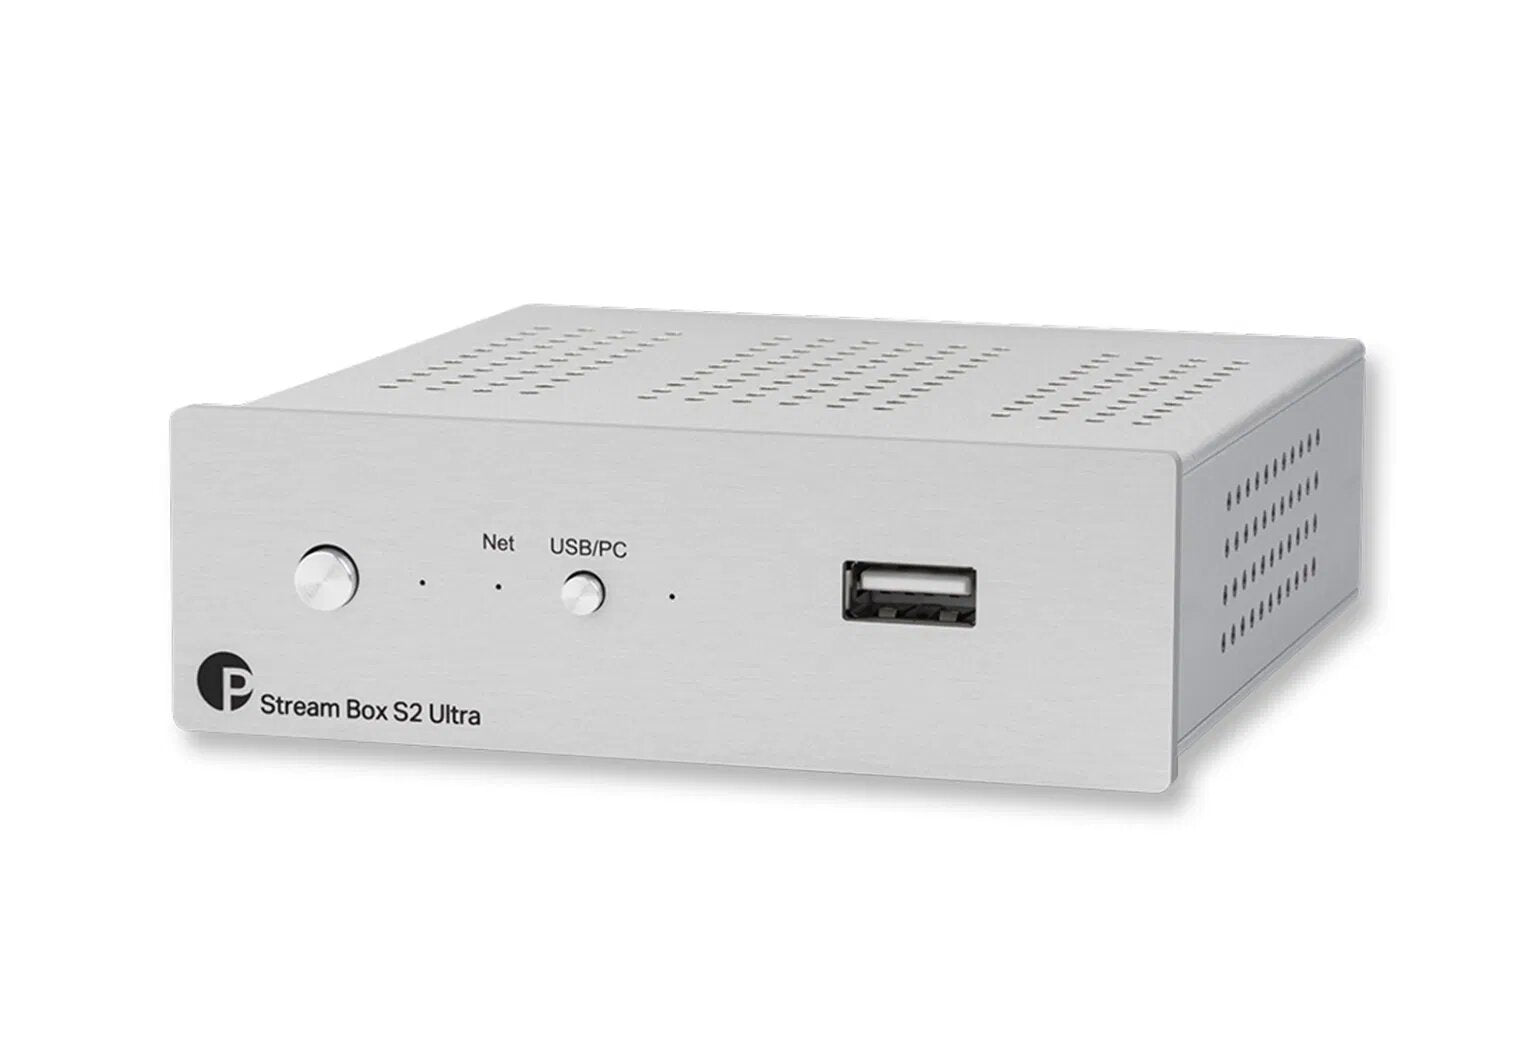 PRO-JECT- STREAM BOX S2 ULTRA - Pro-ject Audio at Vinyl Sound. Available at the best price: Pro-ject Turntables X1 - X8 - X2 – Pro-ject 6 PerspeX SB - RPM 1 Carbon - RPM 10 Carbon – Xtension 12 Evolution... Pro-ject HiFi Electronics Phono Preamplifier · Vinyl Recording · Pro-ject Preamplifier – Pro-ject Phono Box...